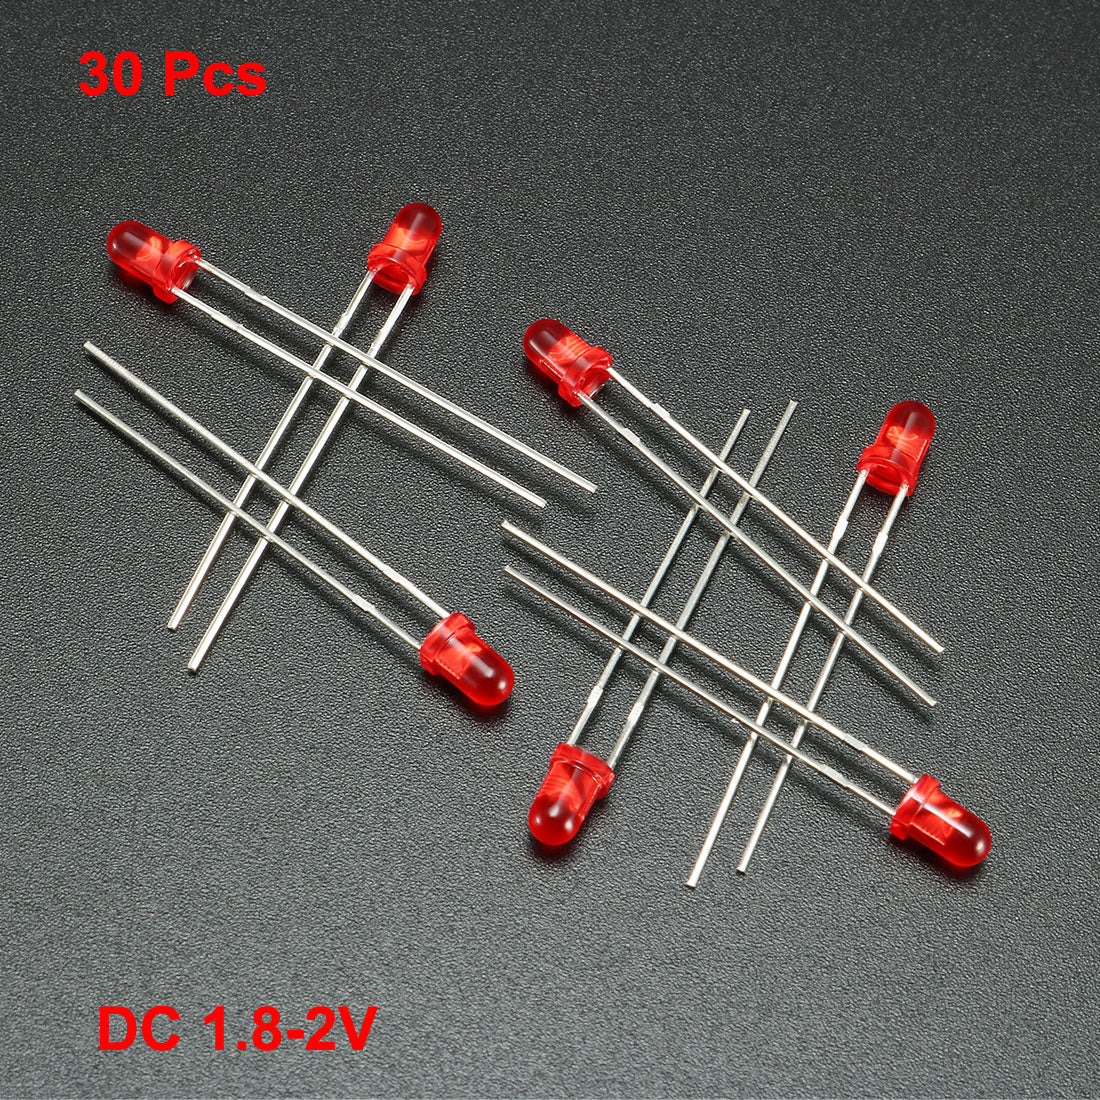 uxcell Uxcell 30pcs 3mm Red LED Diode Lights DC 1.8-2V Bulb Lamps Light Emitting Diode